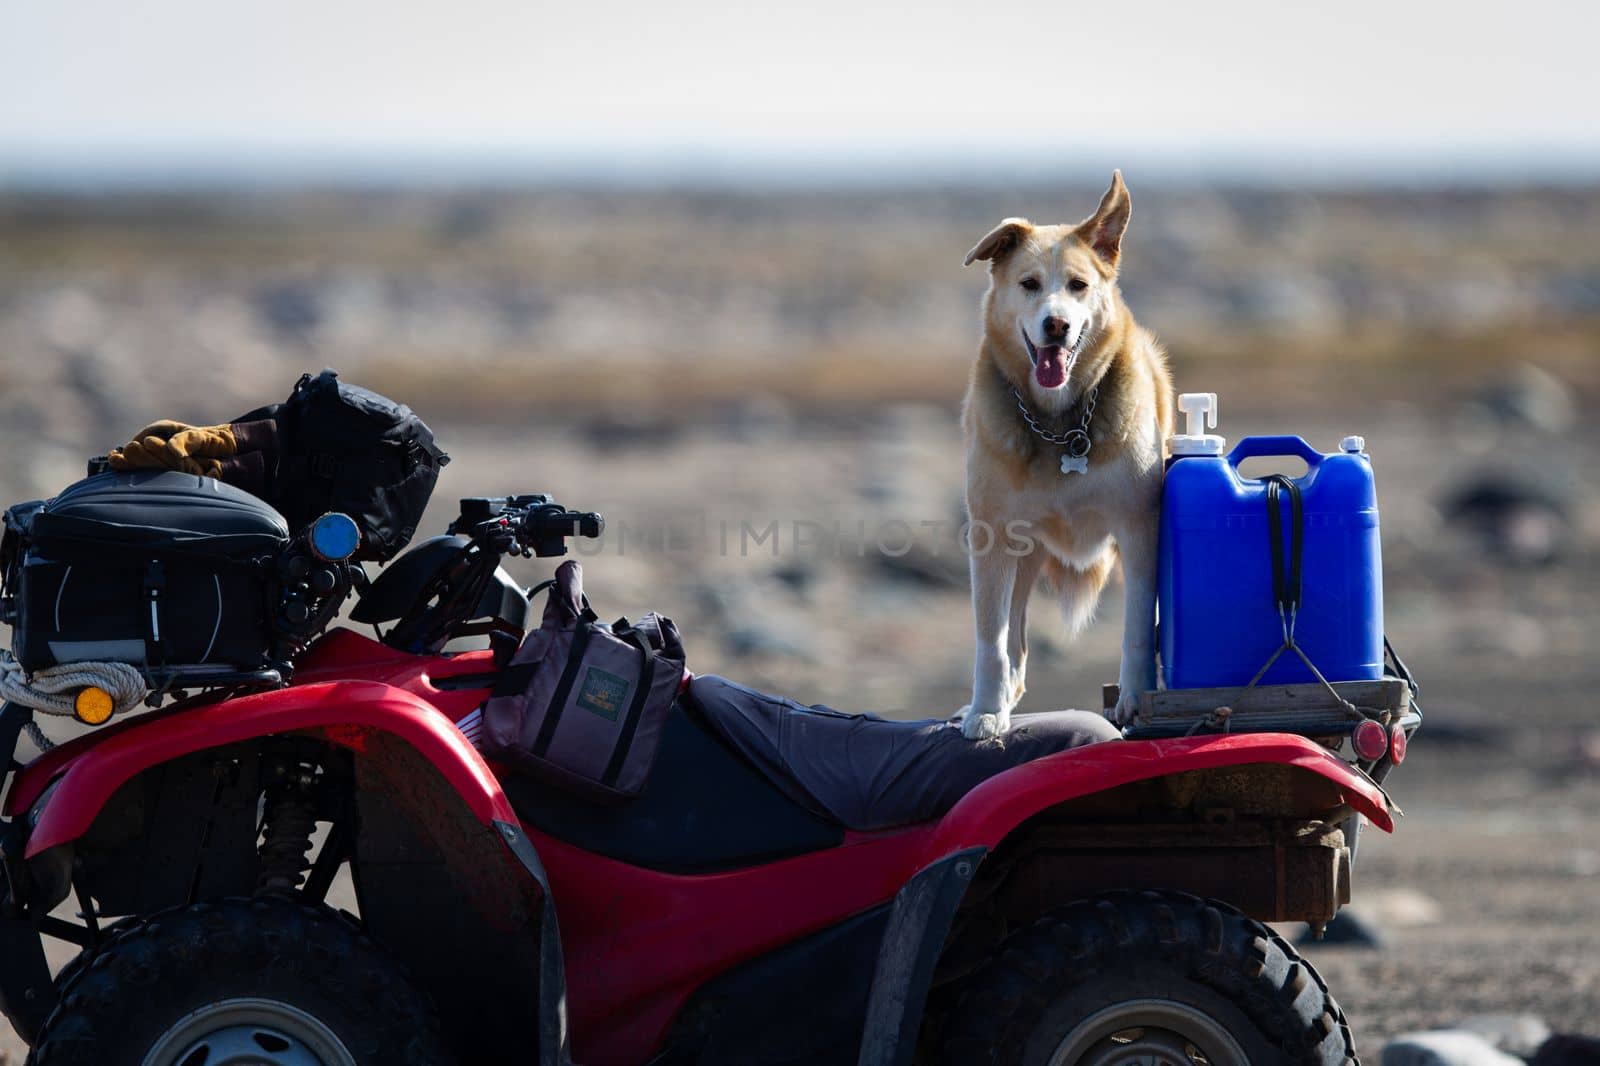 A yellow Labrador dog stands on an all-terrain vehicle ready to go riding by Granchinho